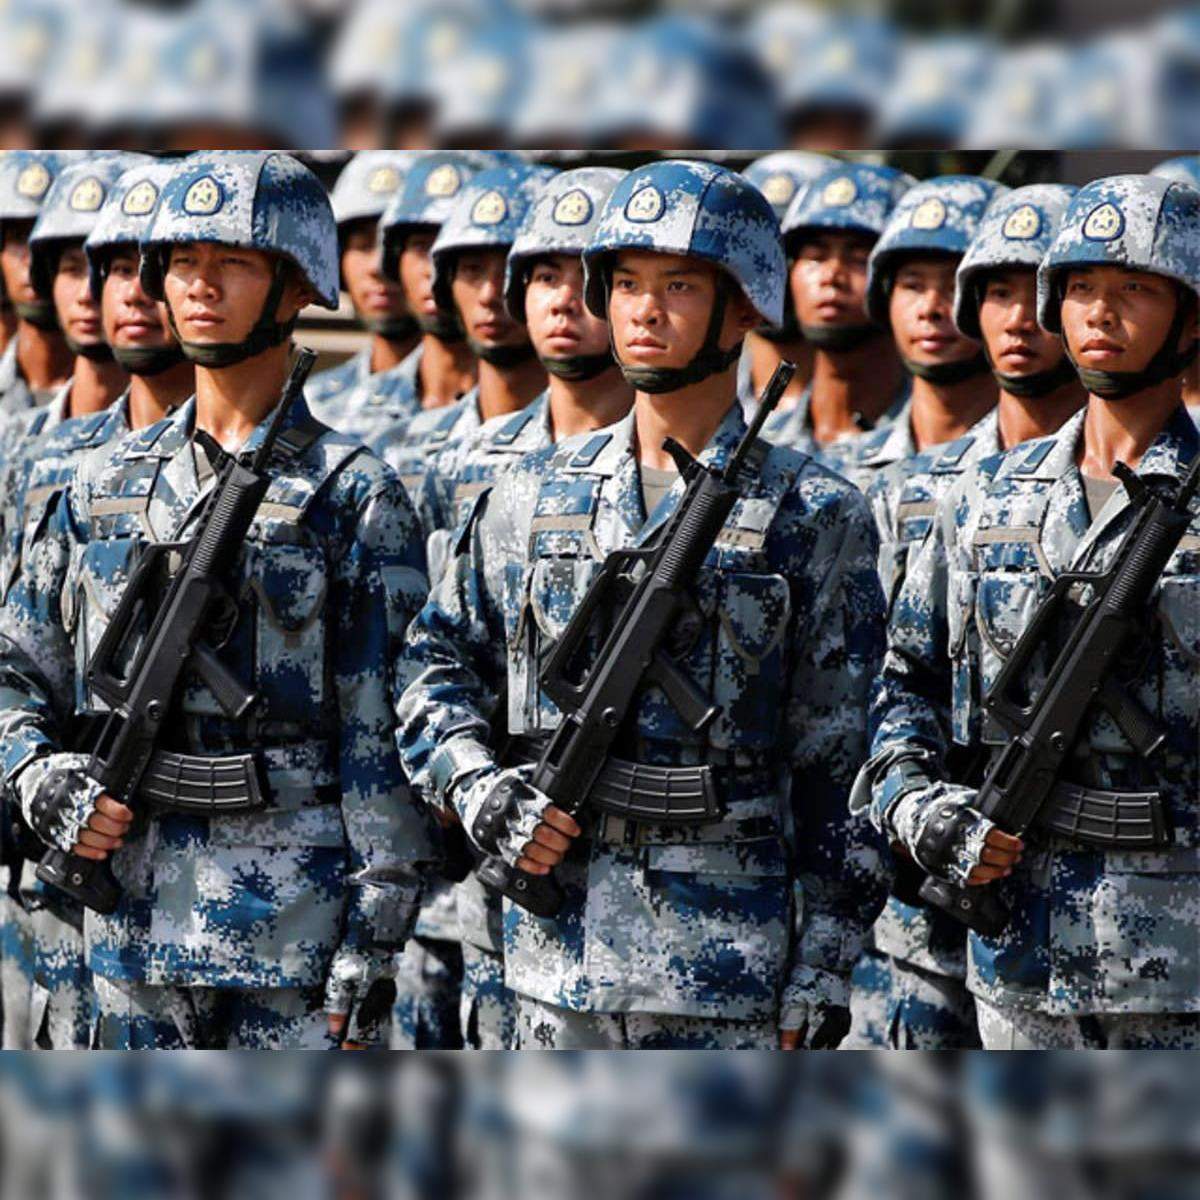 What China's Army-issue underwear reveals 